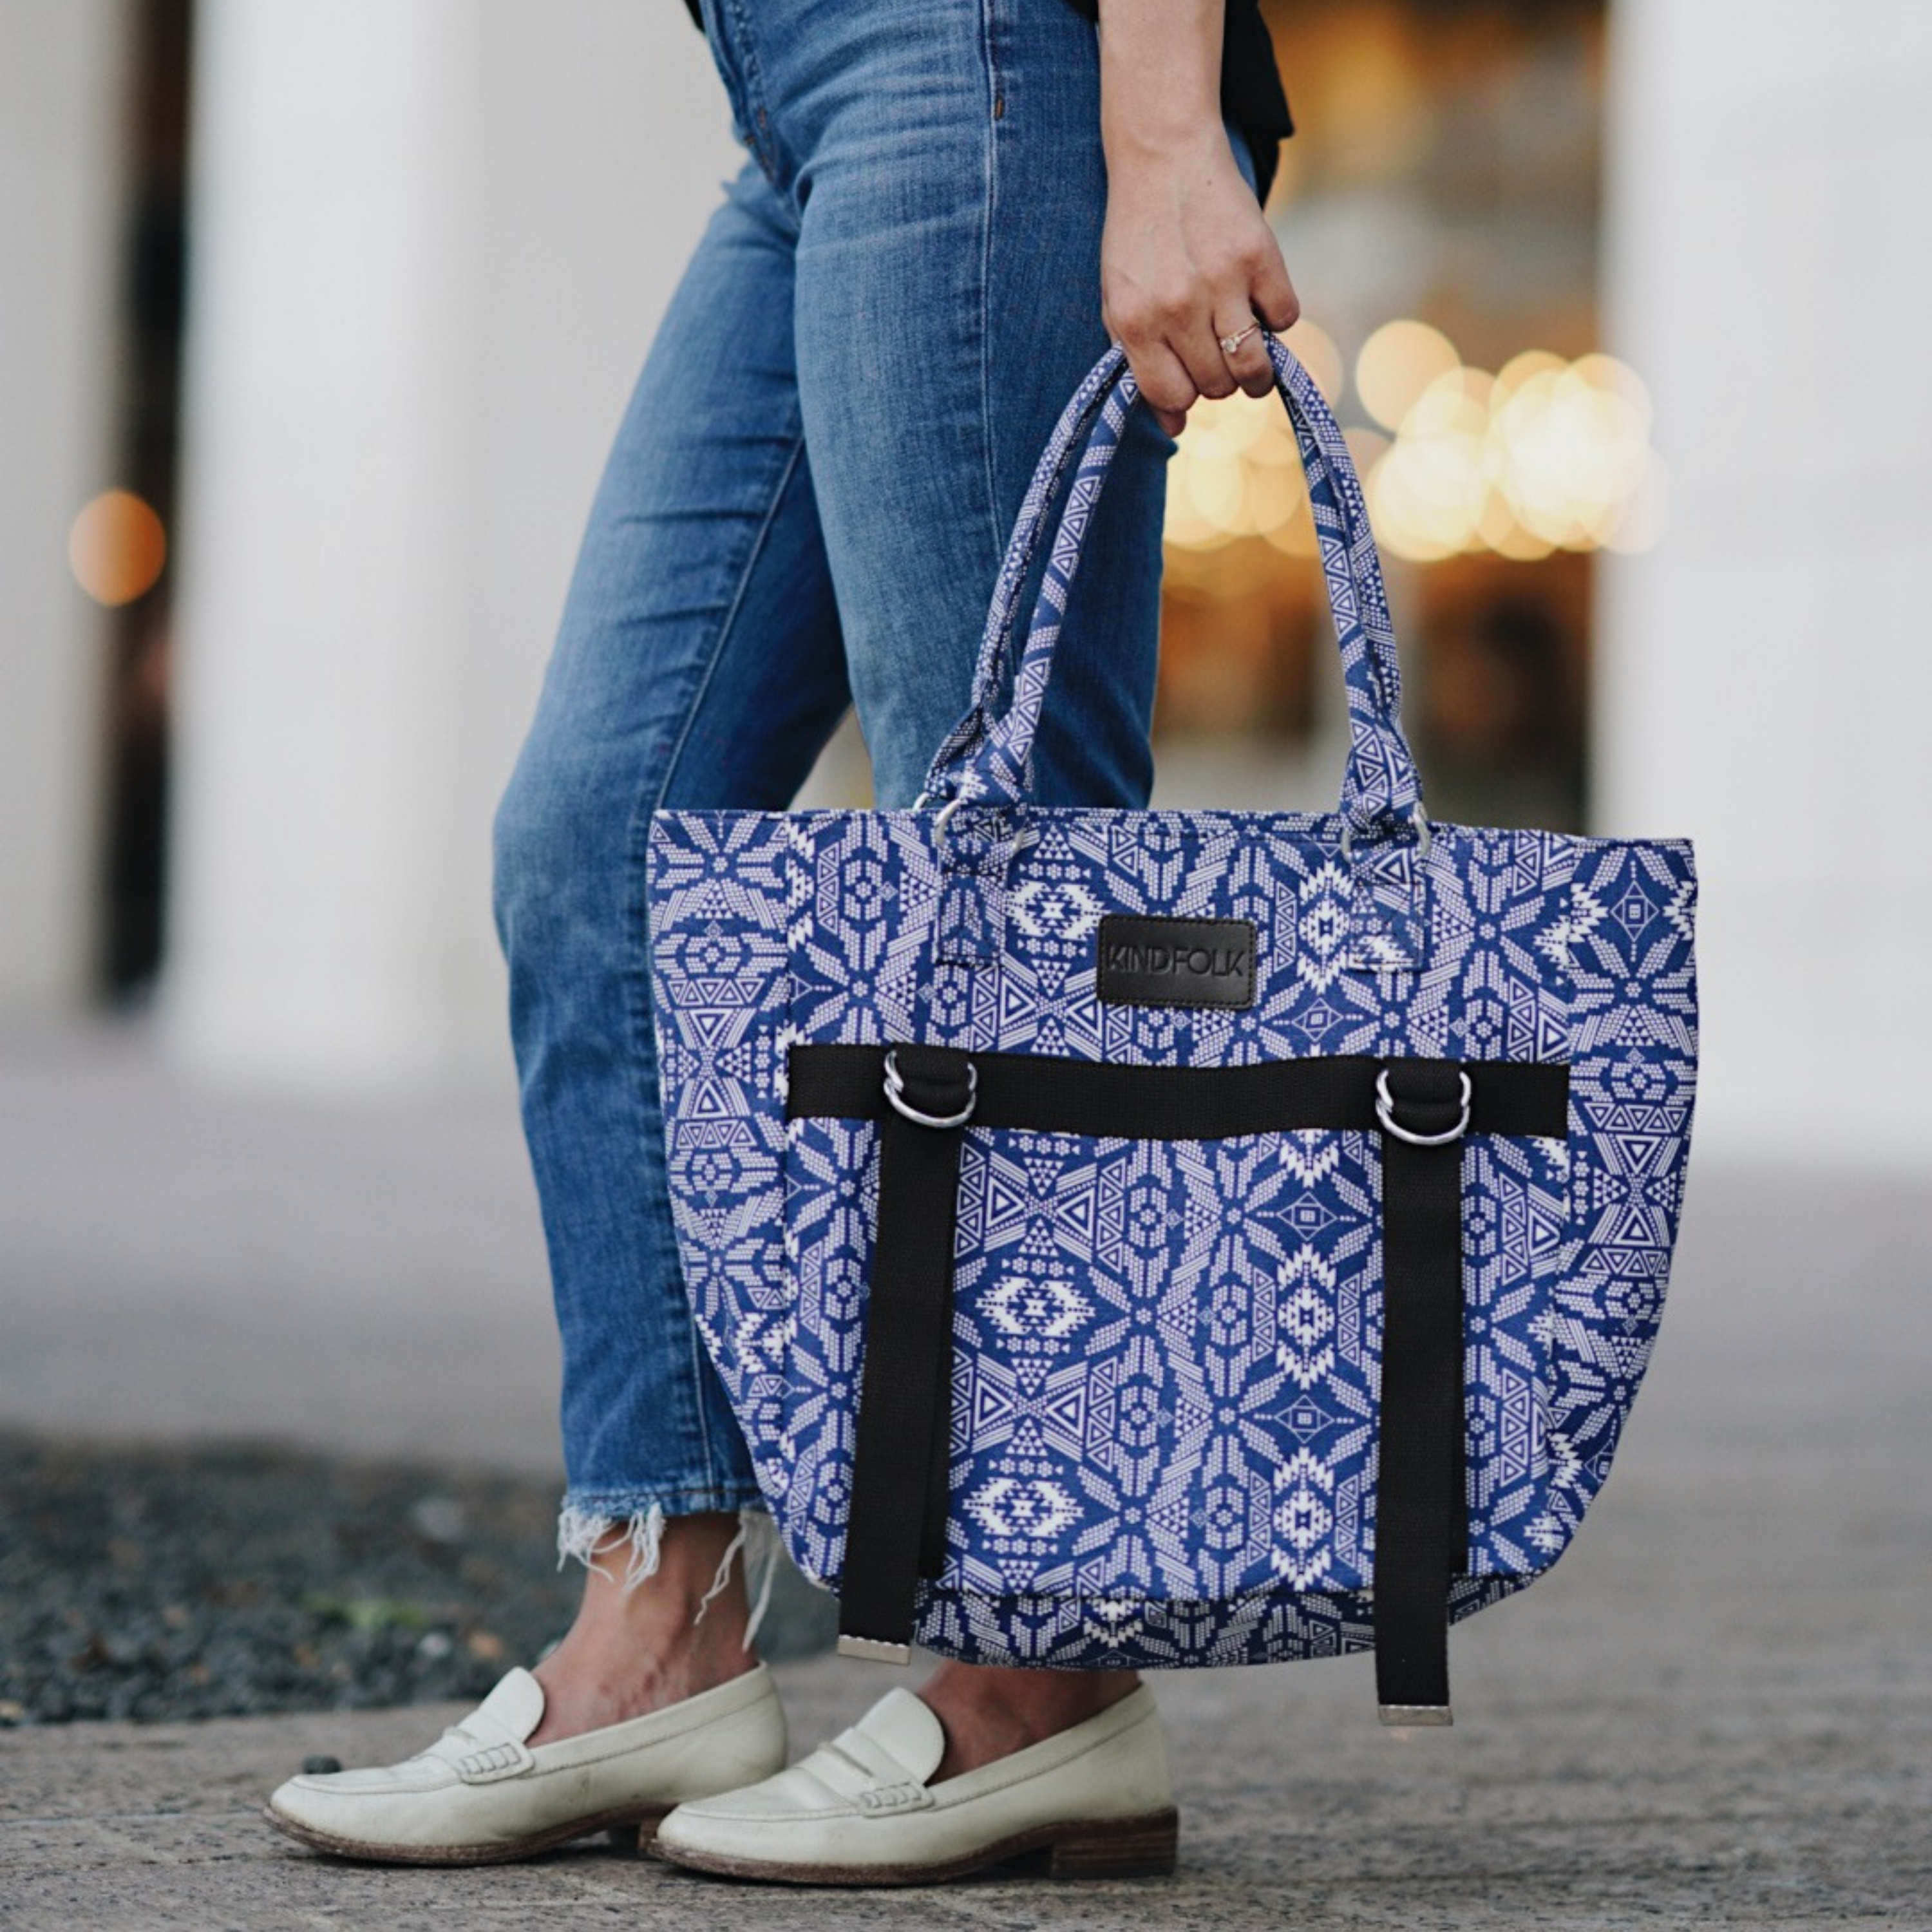 third floor quilts: quilted yoga mat tote bag